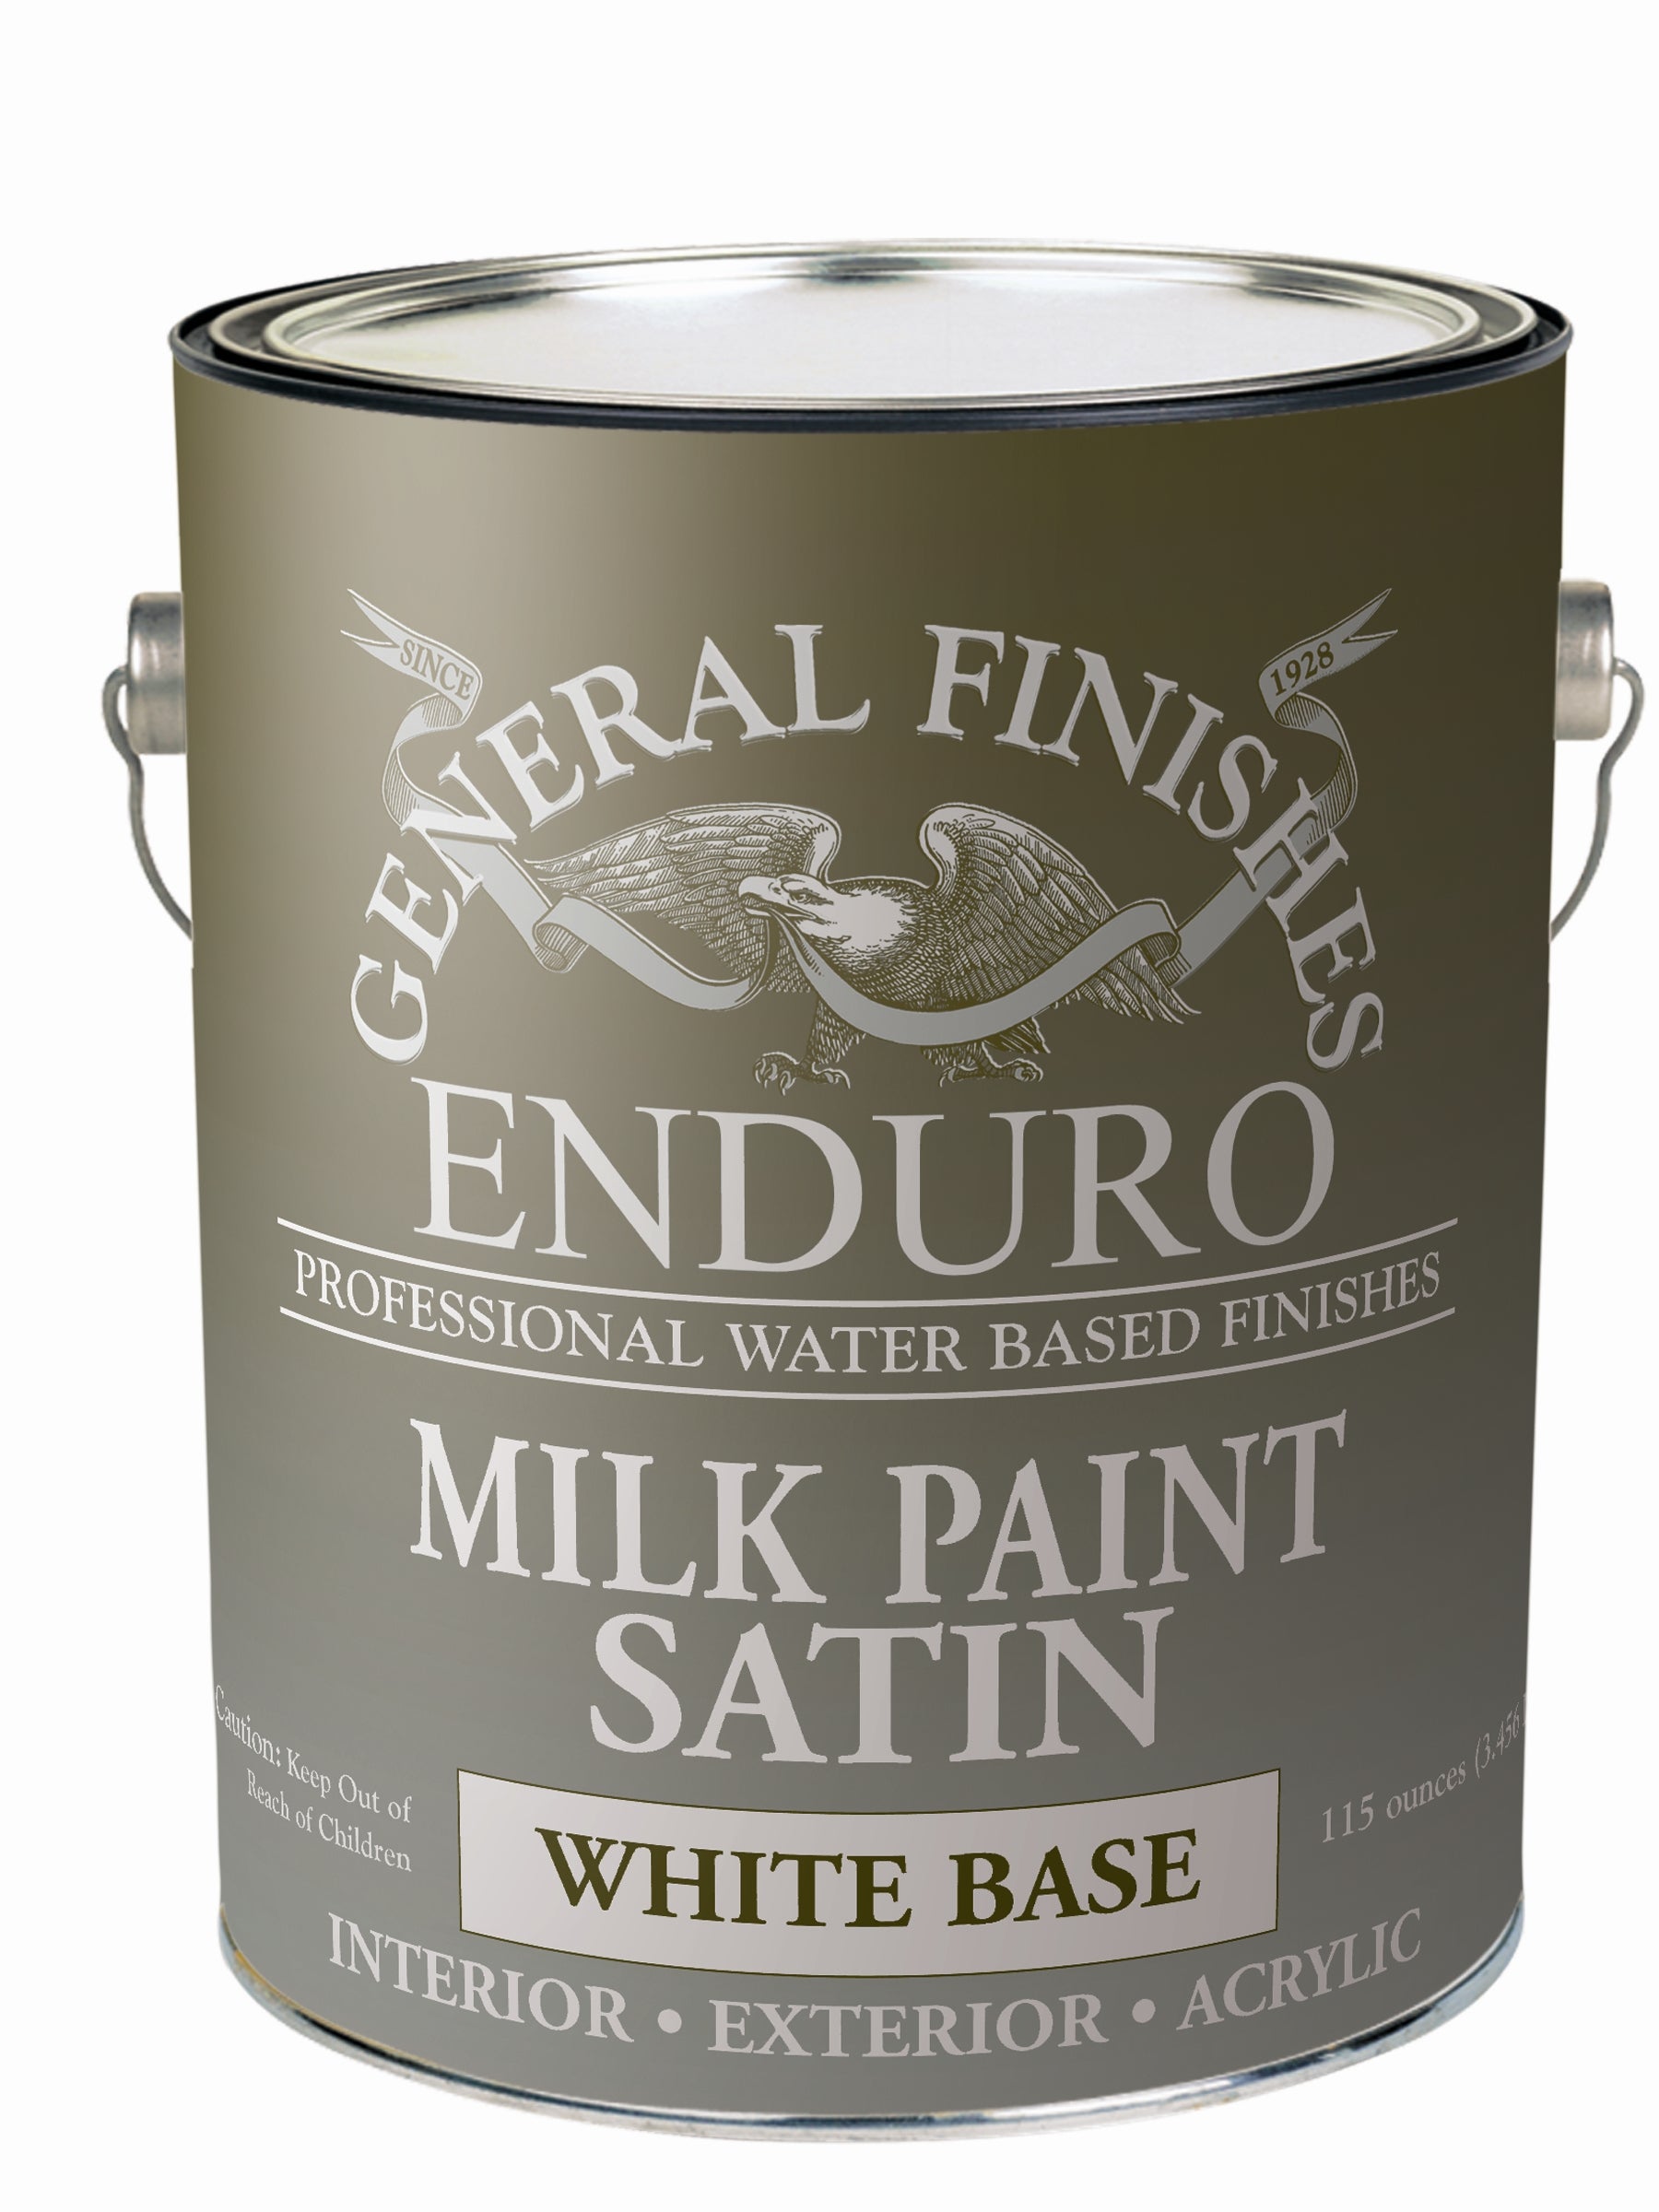 General Finishes Water Based White Base Milk Paint, Specialty Coatings